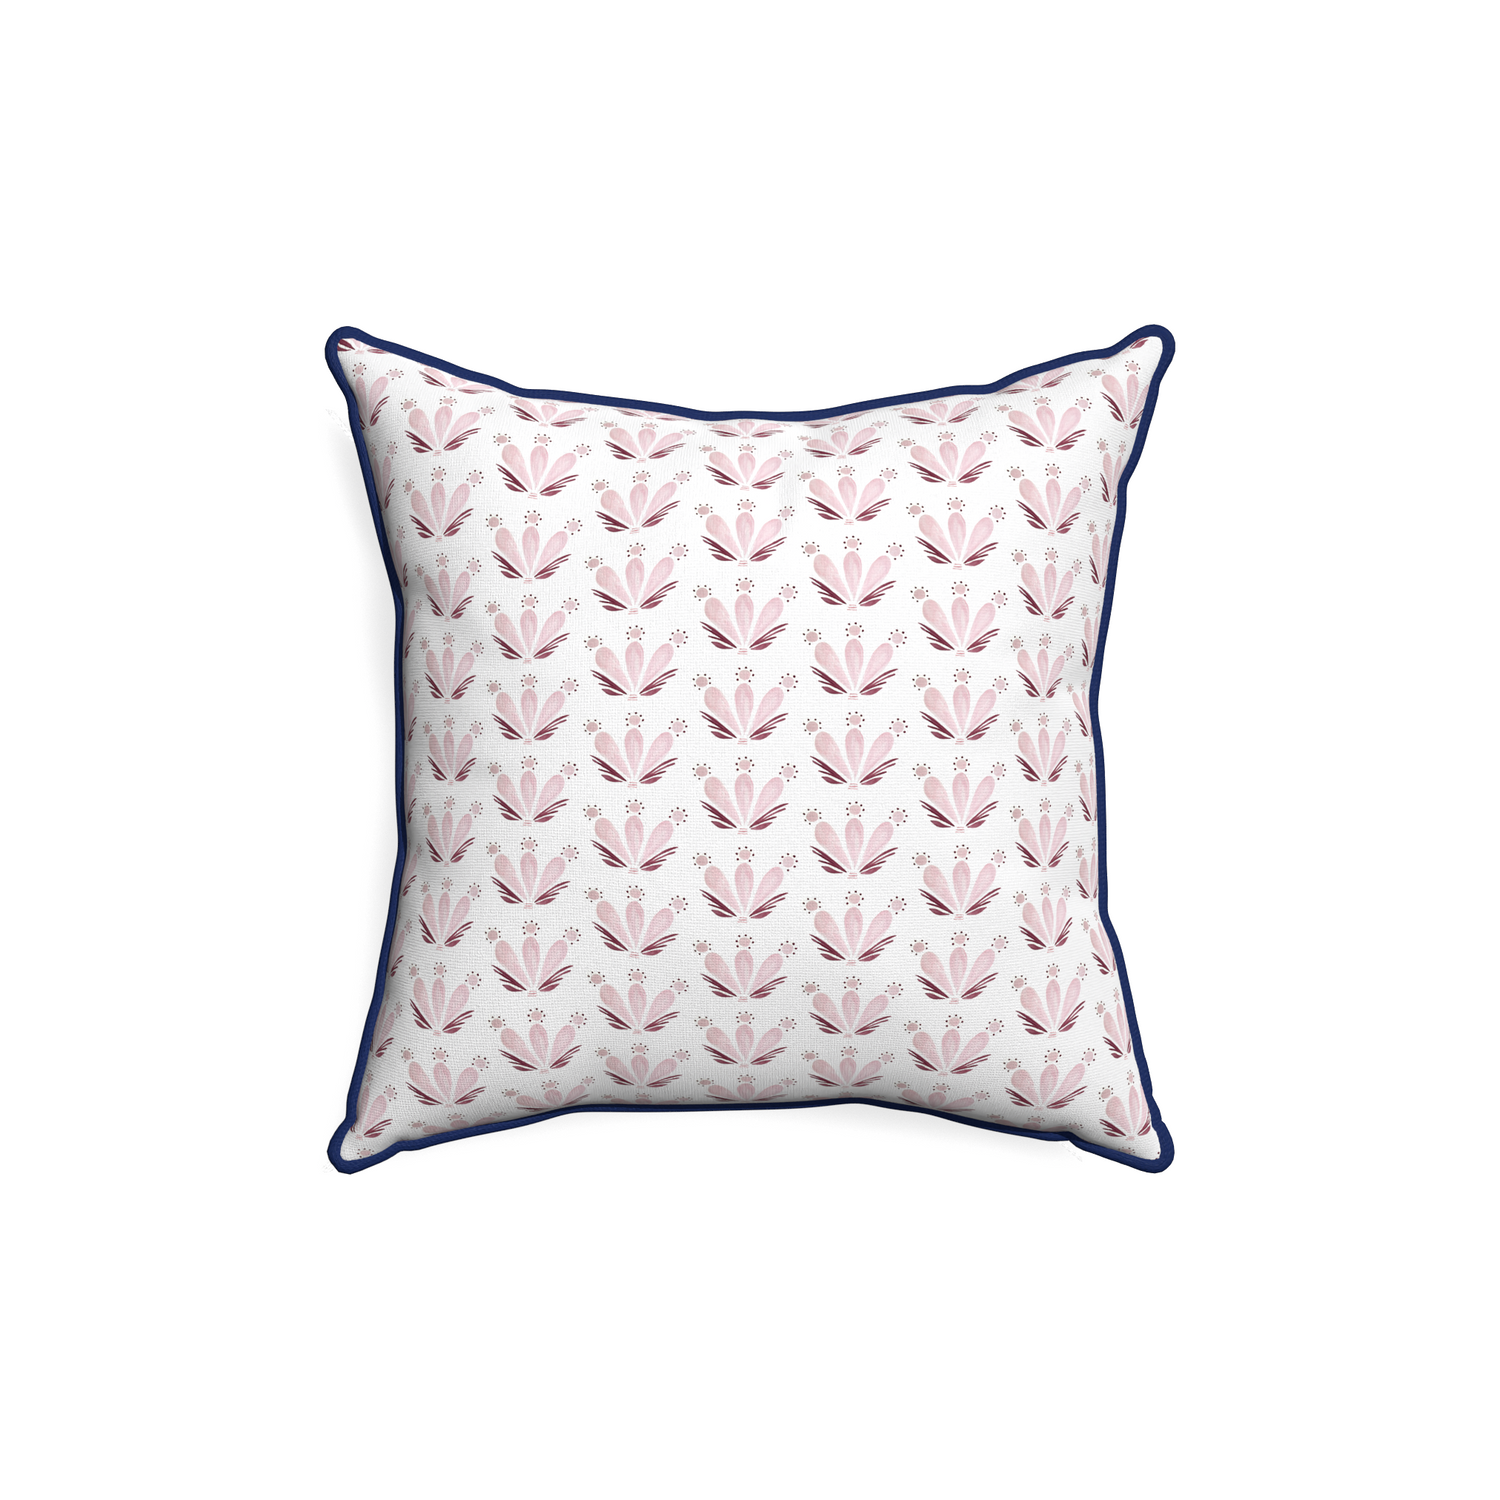 18-square serena pink custom pillow with midnight piping on white background